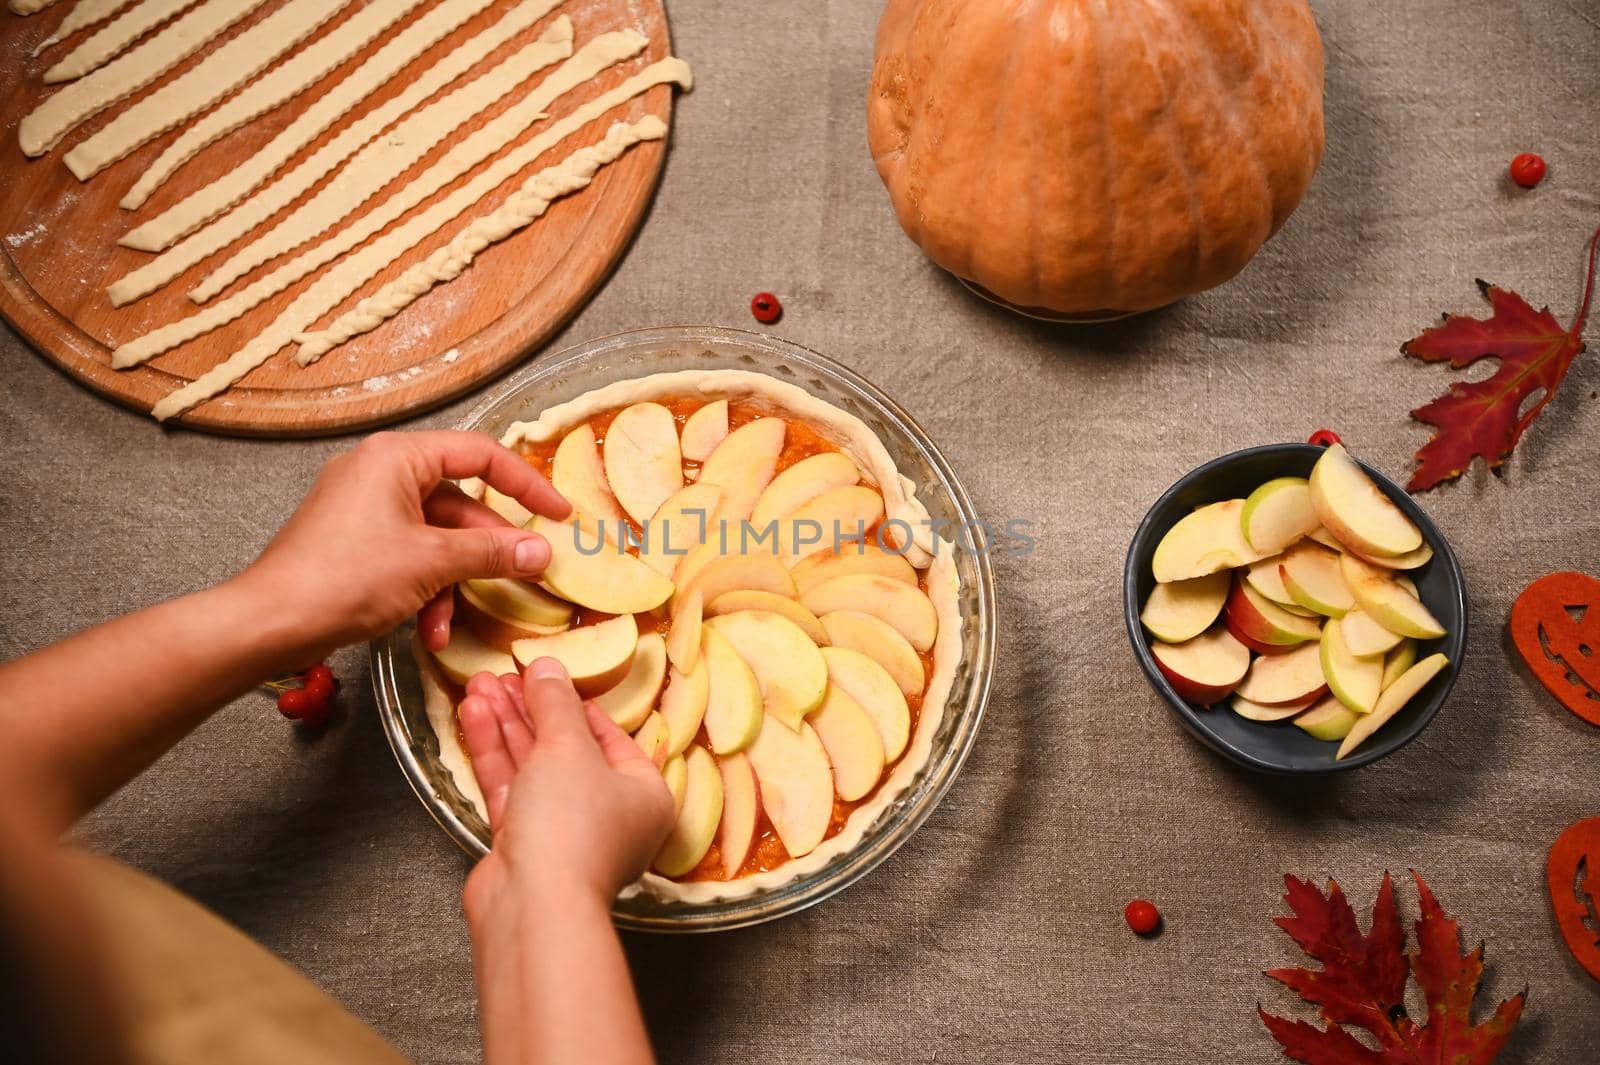 Top view of housewife, chef confectioner putting slices of apples on a raw pumpkin pie, preparing homemade traditional American classic tarte with crust lattice, for Thanksgiving Day. Autumn holidays